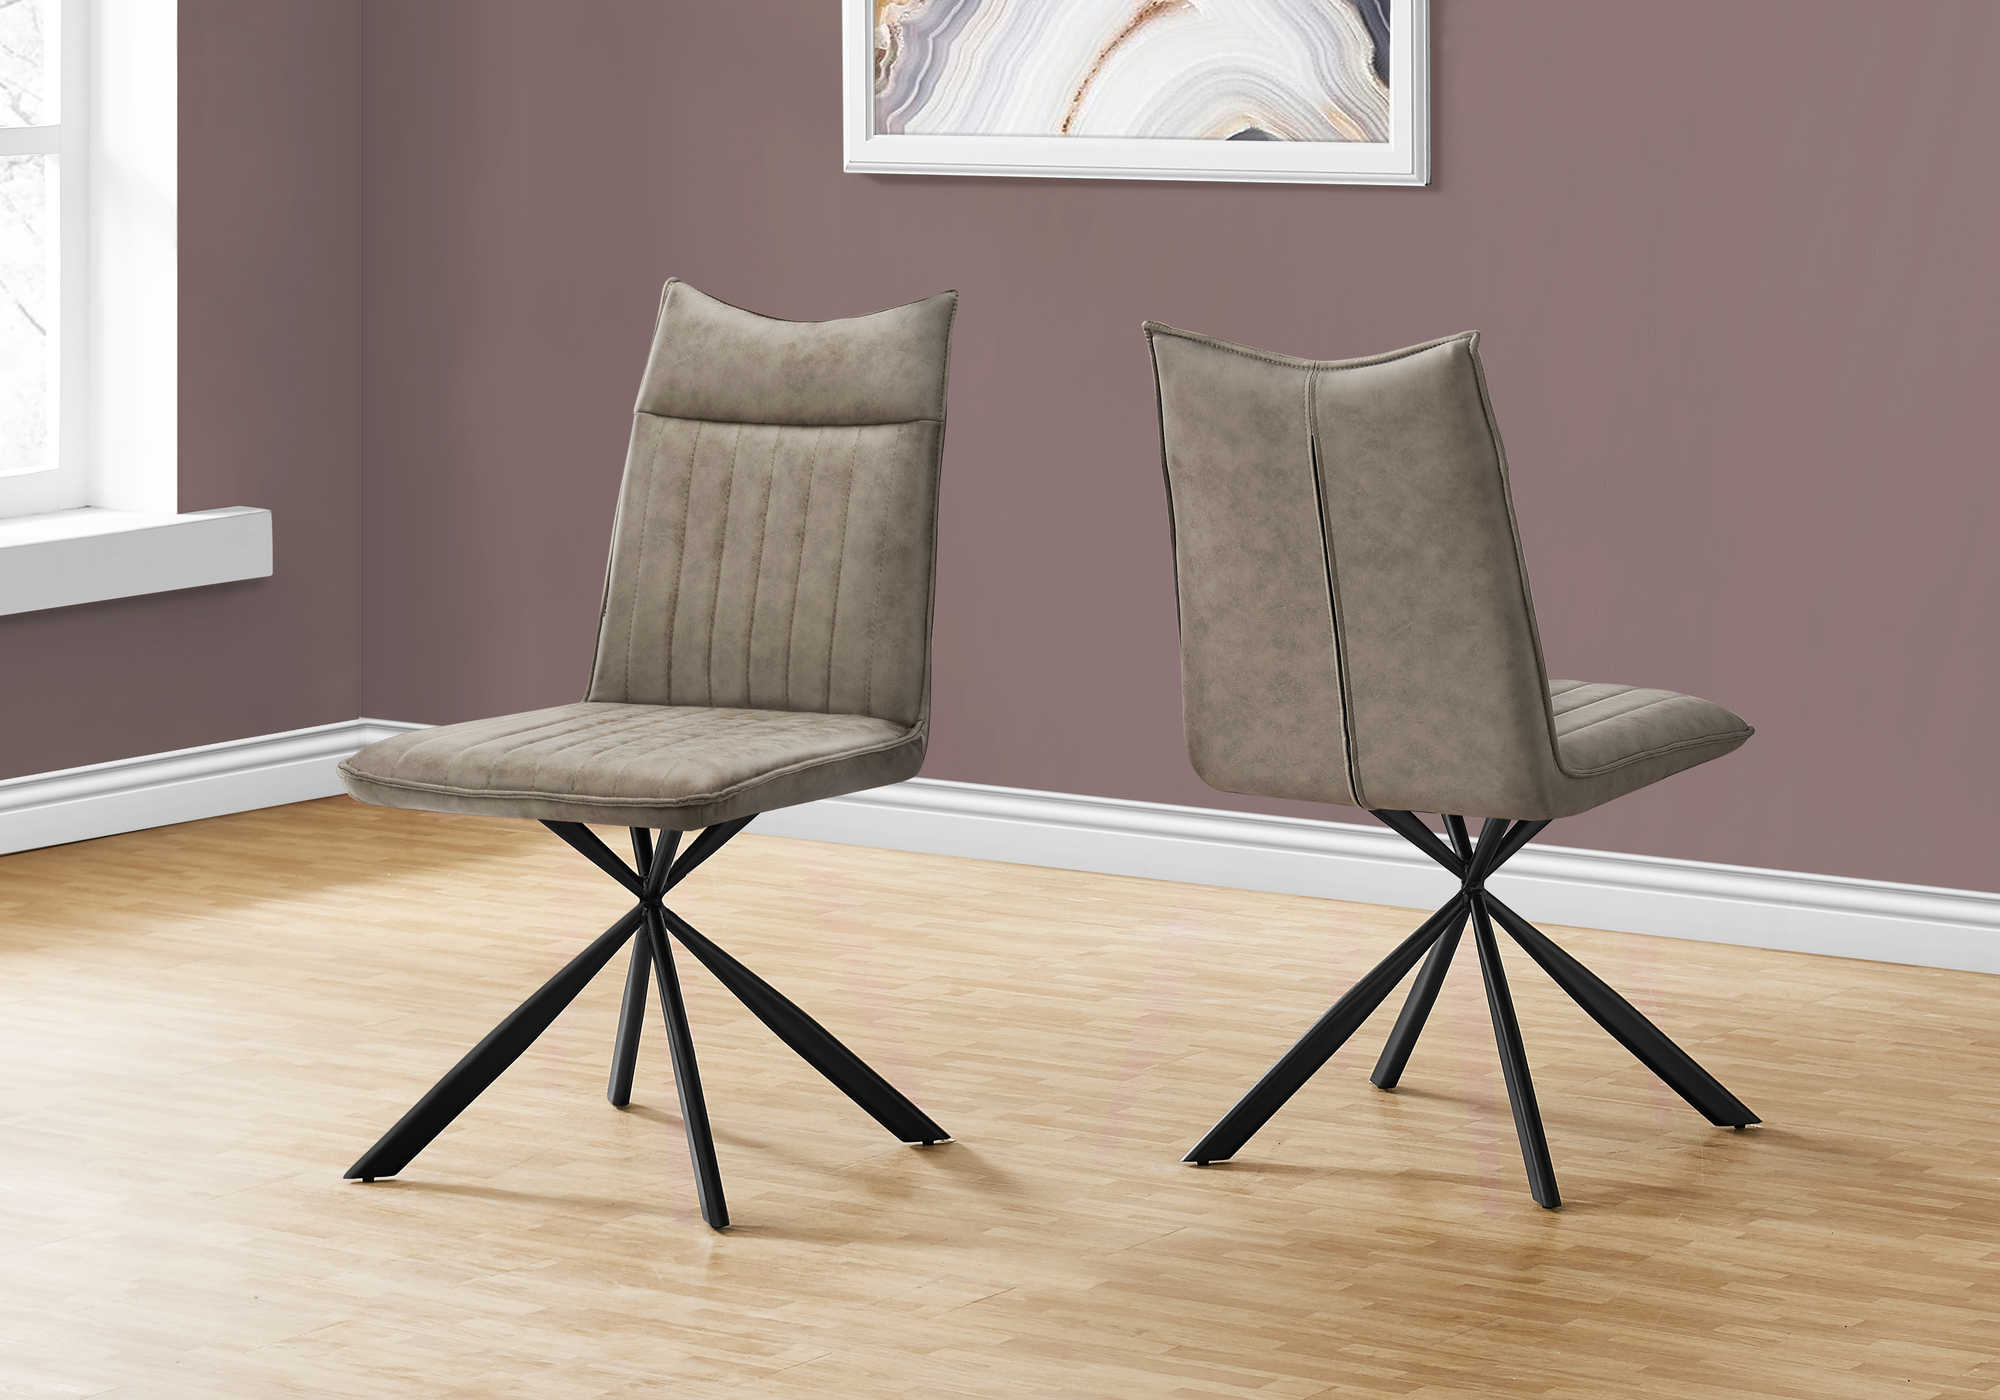 DINING CHAIR - 2PCS / 36"H / TAUPE FABRIC / BLACK METAL